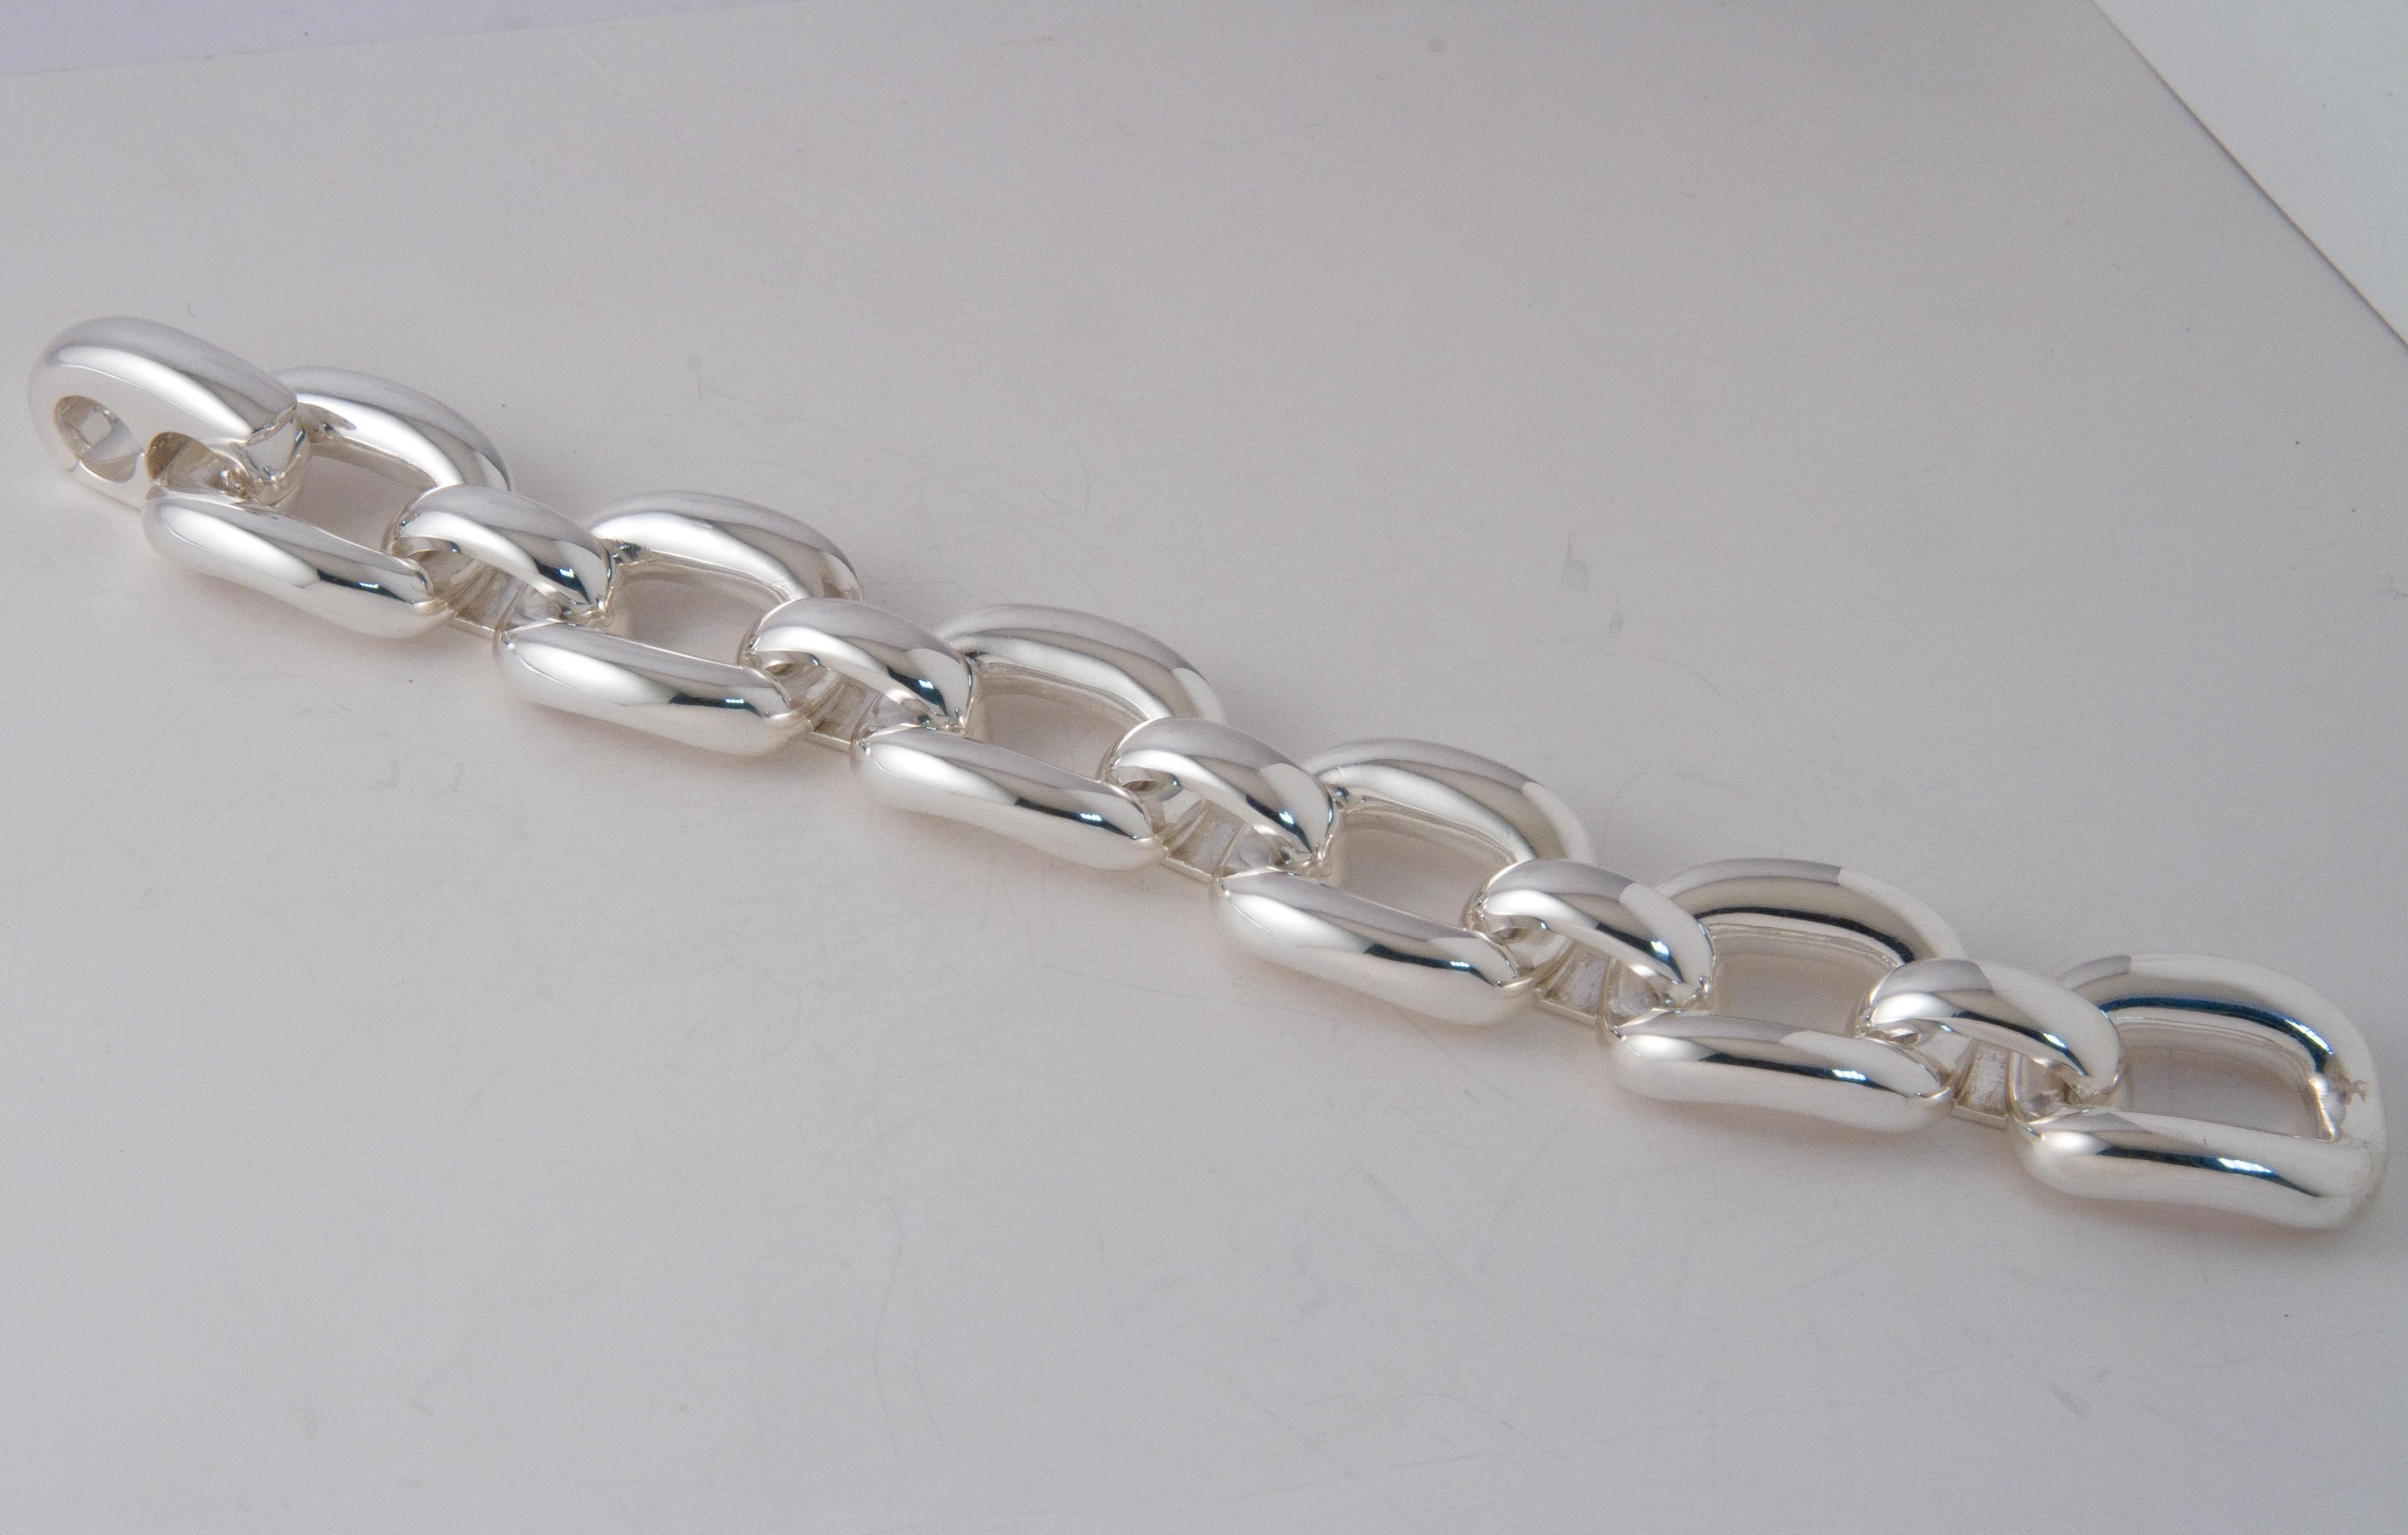 Solid silver 925
square link 
Weigth 114 grams
With security Claps 
